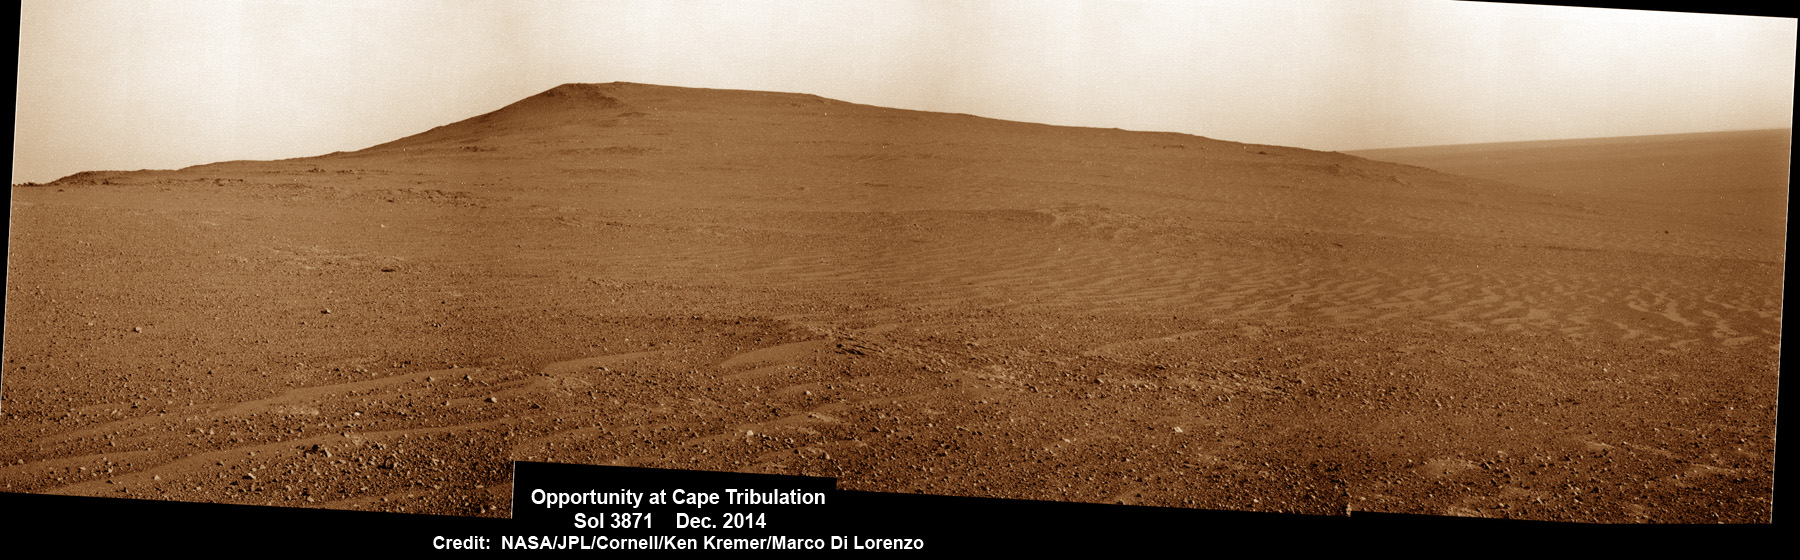 NASA’s Opportunity Mars rover scans to the summit of Cape Tribulation less than 100 meters distant in mid-December 2014 with hi res pancam camera.  Beyond lie caches of clay minerals. The scene shows impact breccias and thin soil cover with cobbles over bedrock.  This pancam camera photo mosaic was assembled from images taken on Sol 3871, Dec. 13, 2014 and colorized.  Credit: NASA/JPL/Cornell/ Ken Kremer - kenkremer.com/ Marco Di Lorenzo